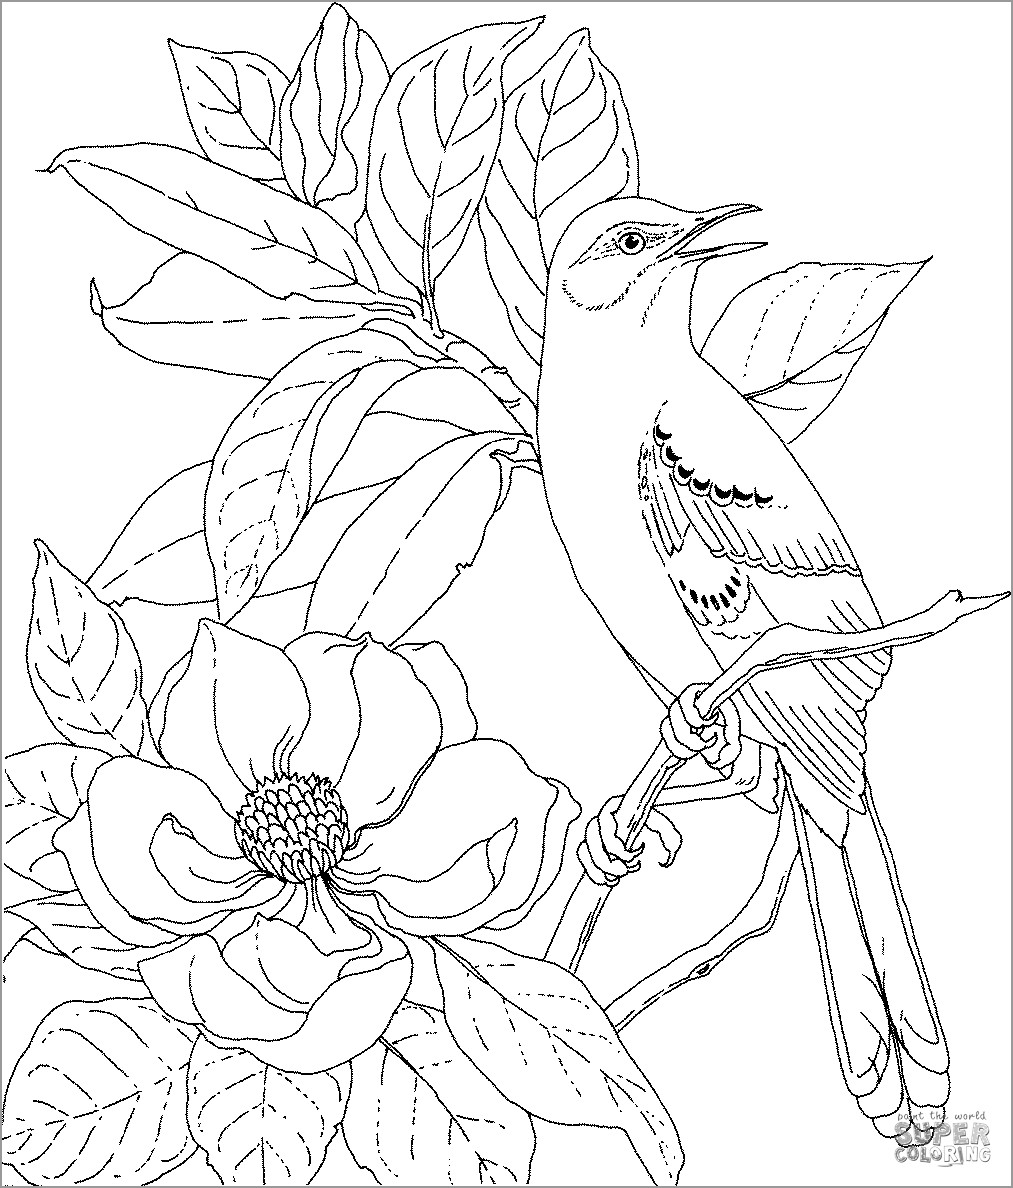 Coloring Page Of A Mockingbird